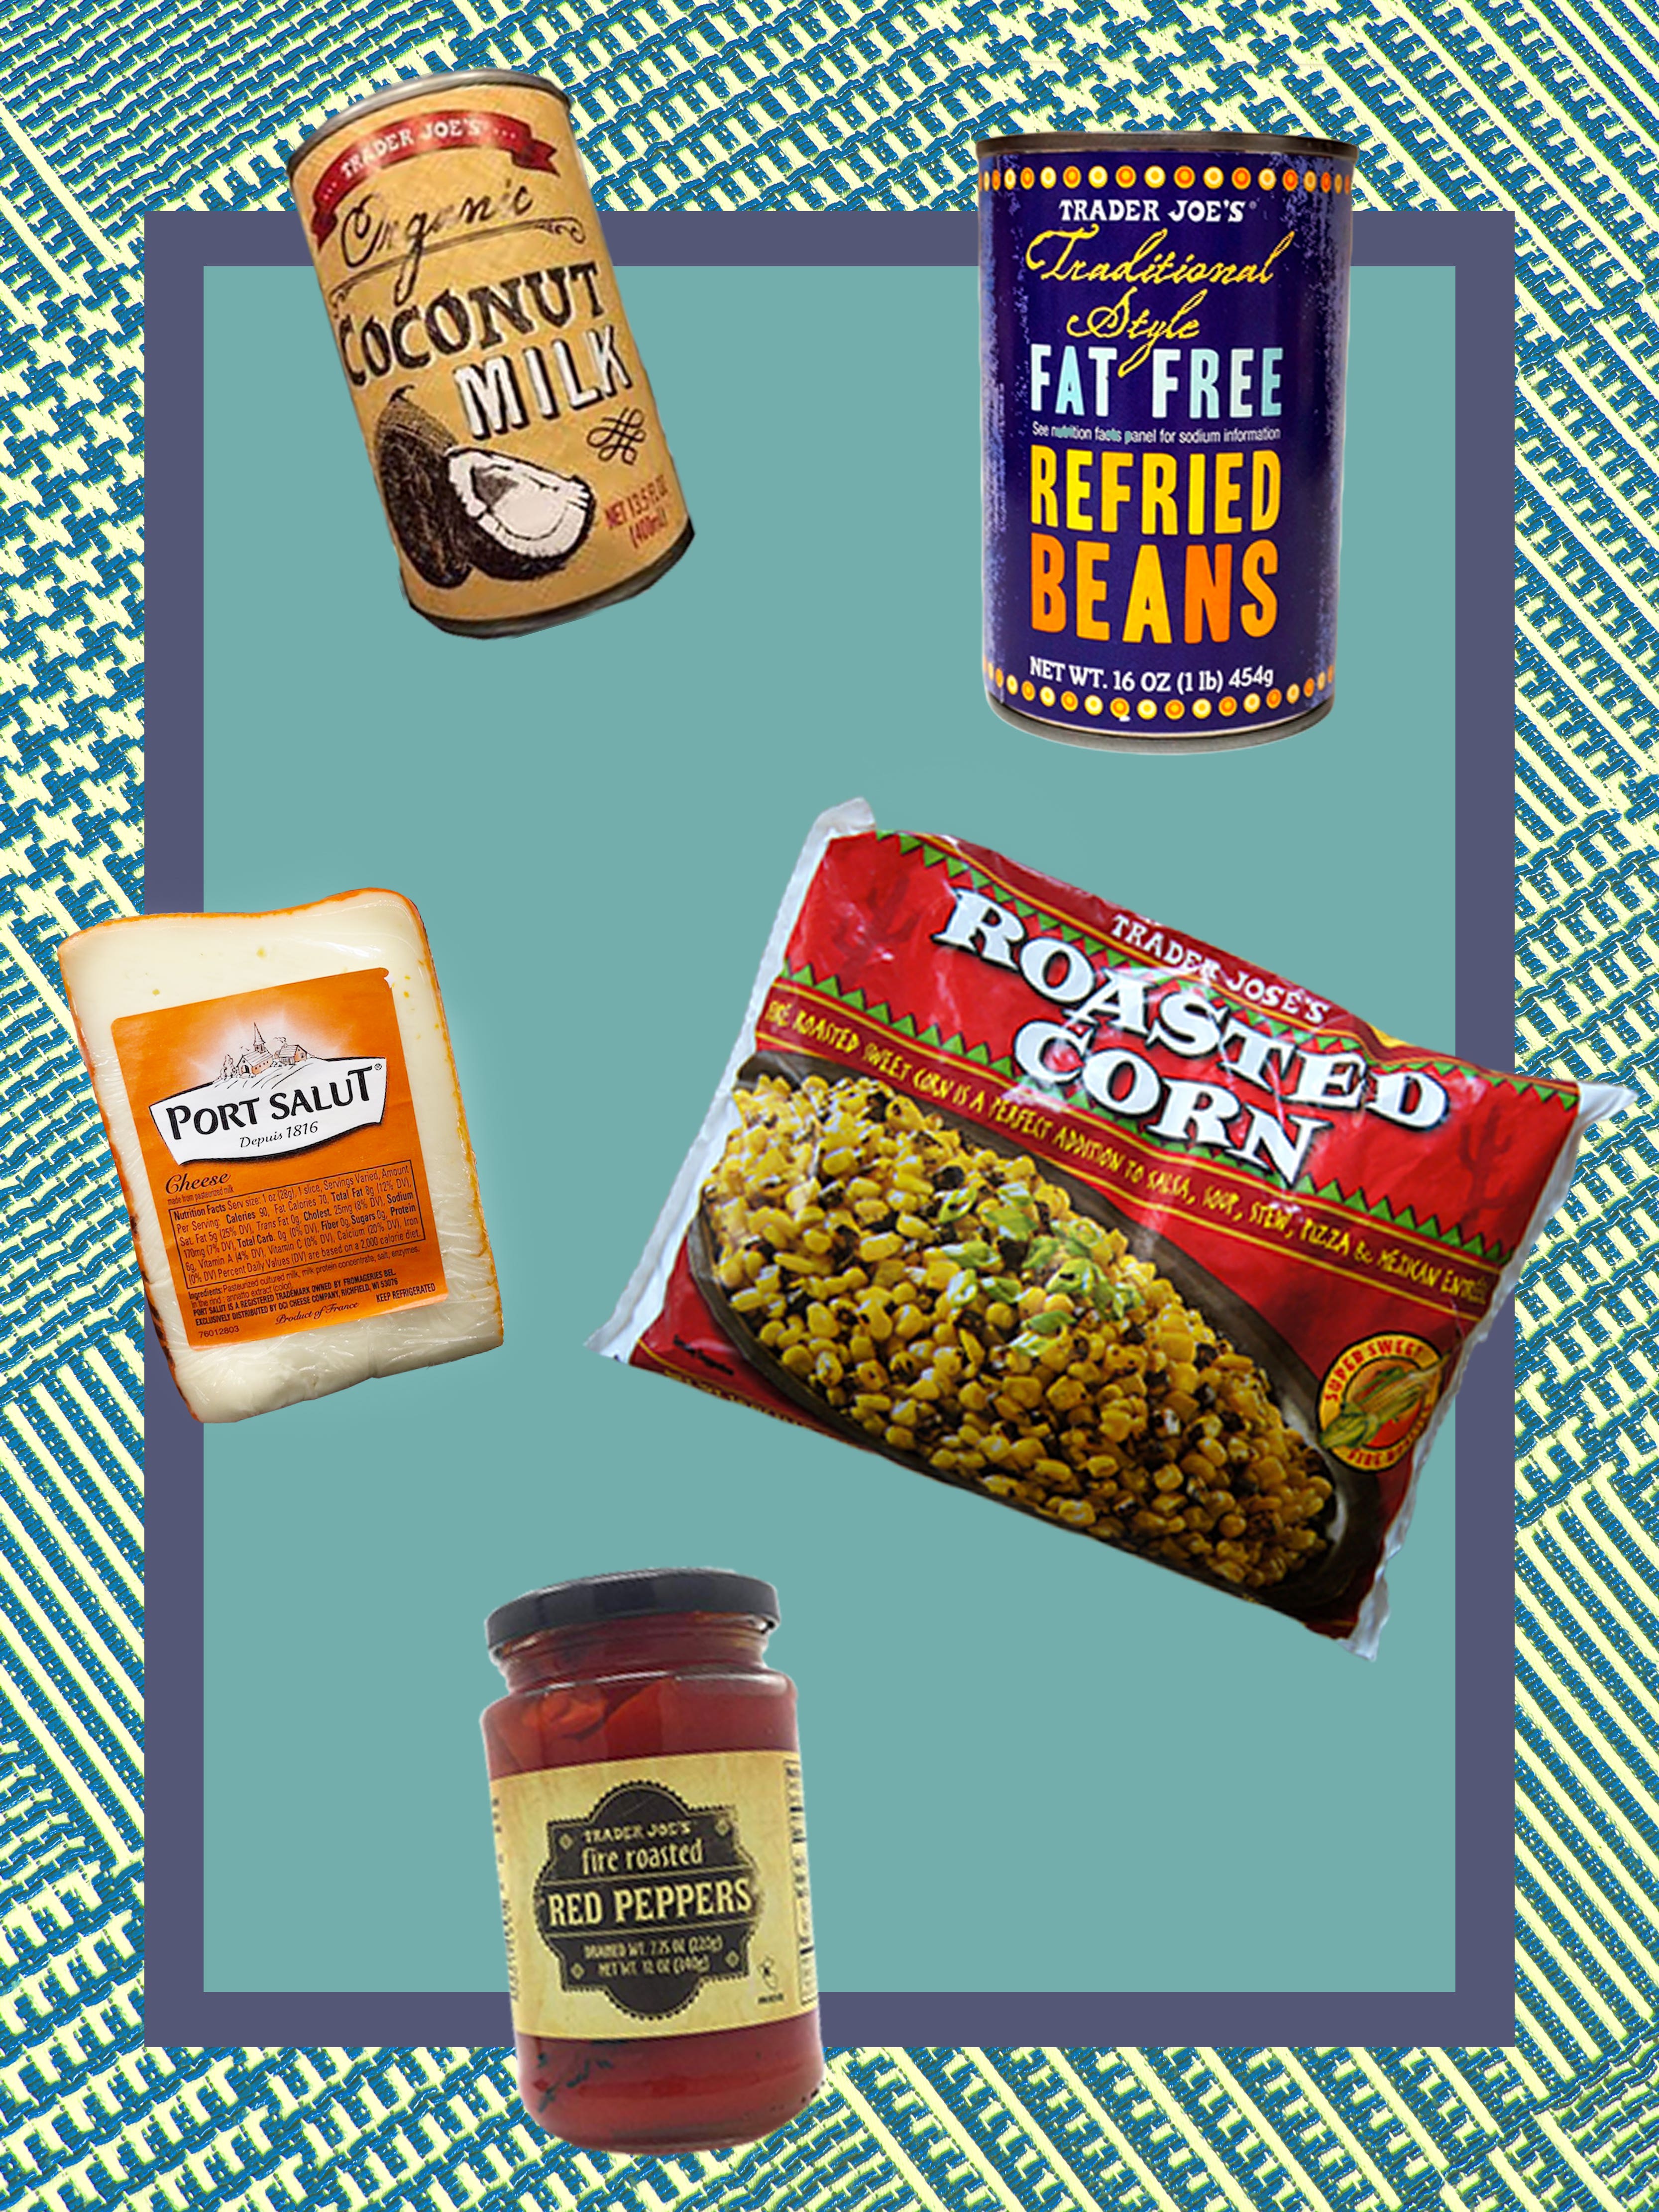 Gaby Dalkin of What’s Gaby Cooking Shares Her Trader Joe’s Essentials